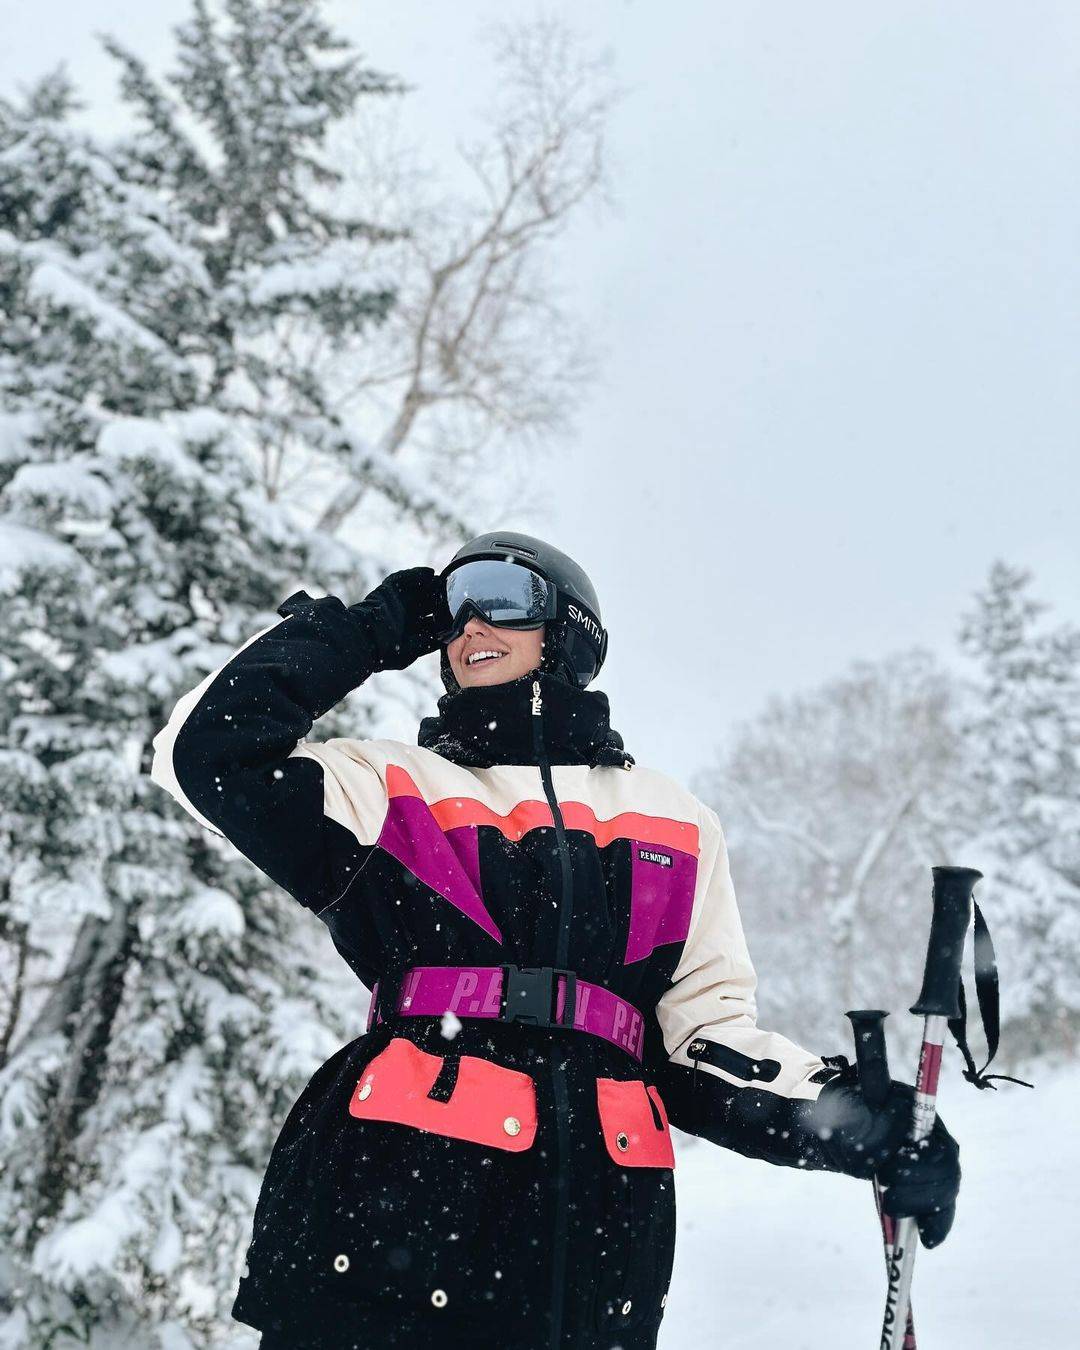 A woman skiing as it snows outside